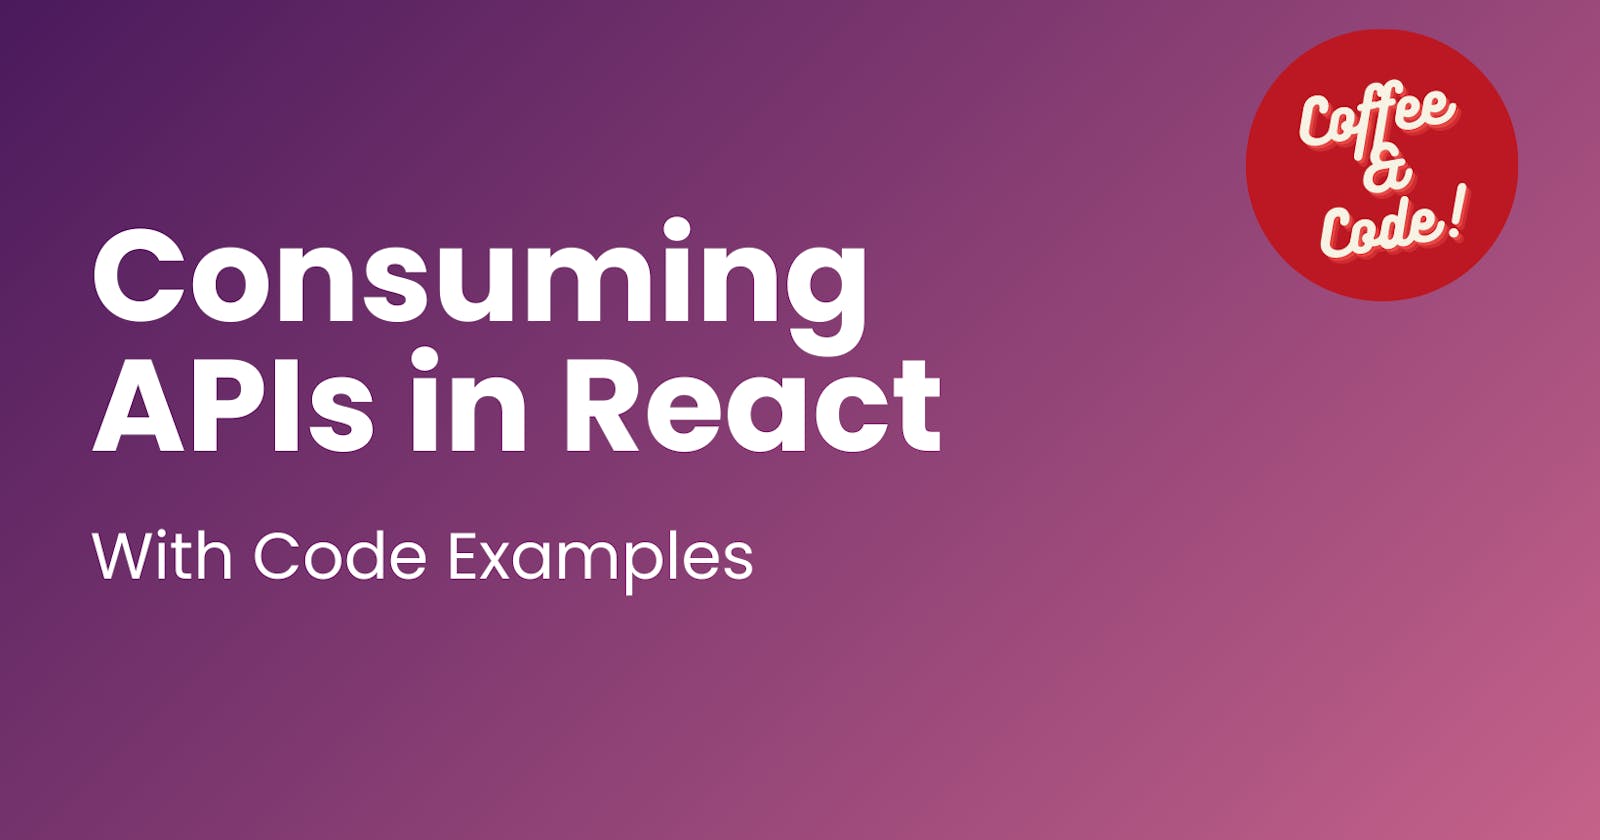 Consuming APIs in React (With Code Examples)